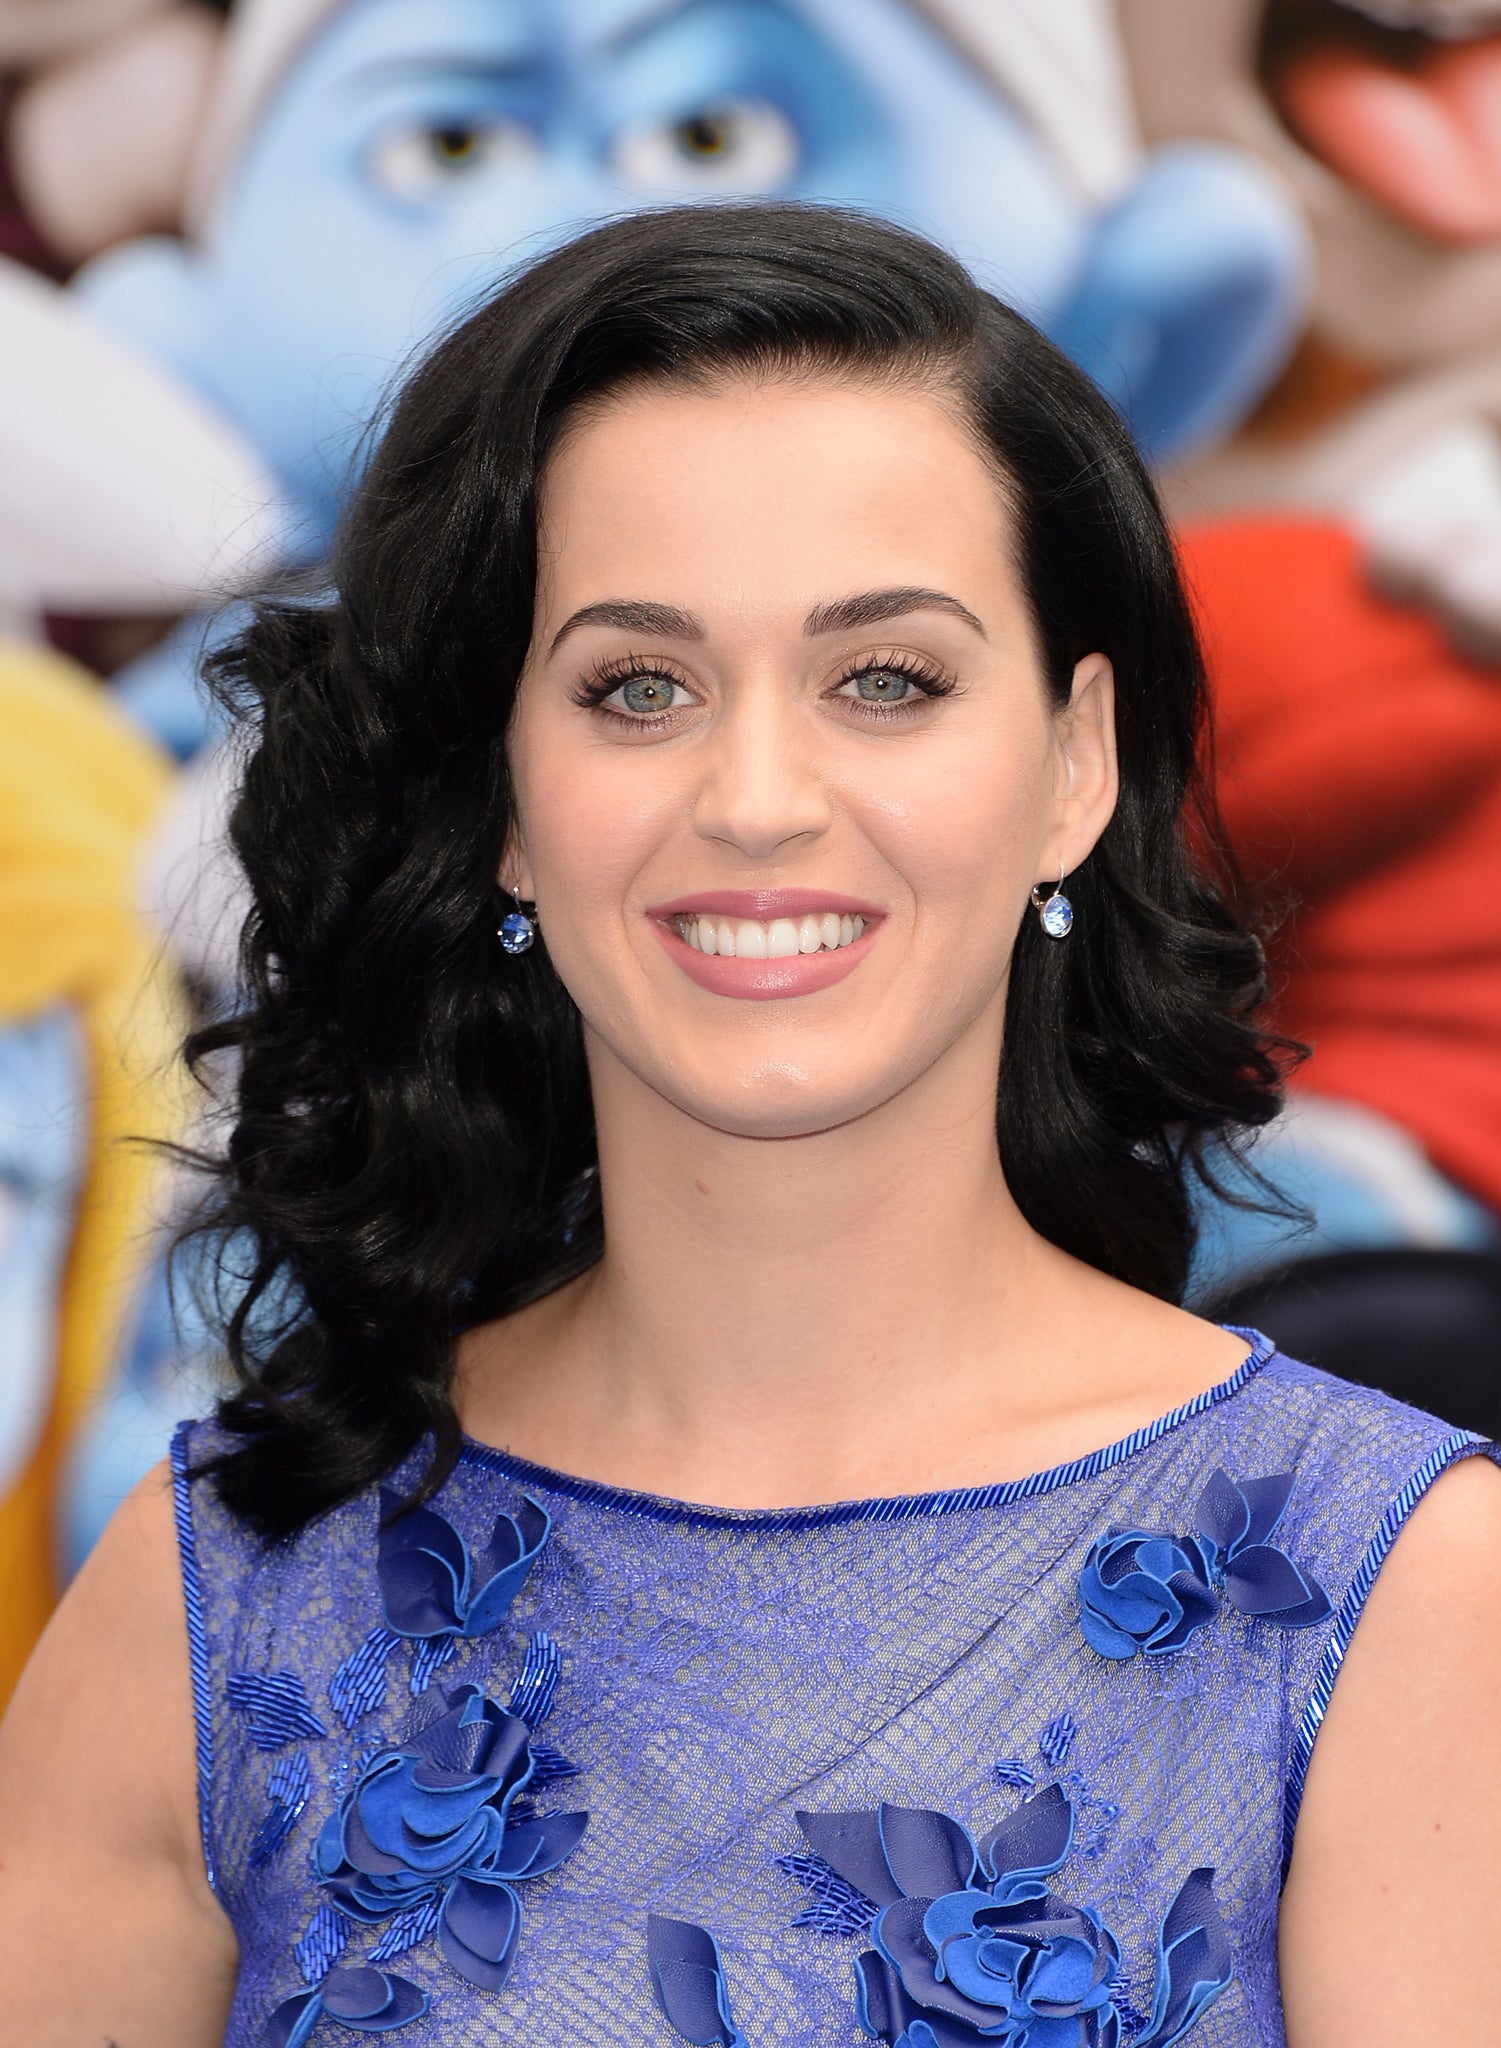 Katy Perry denies romantic link to Robert Pattinson | The Independent ...